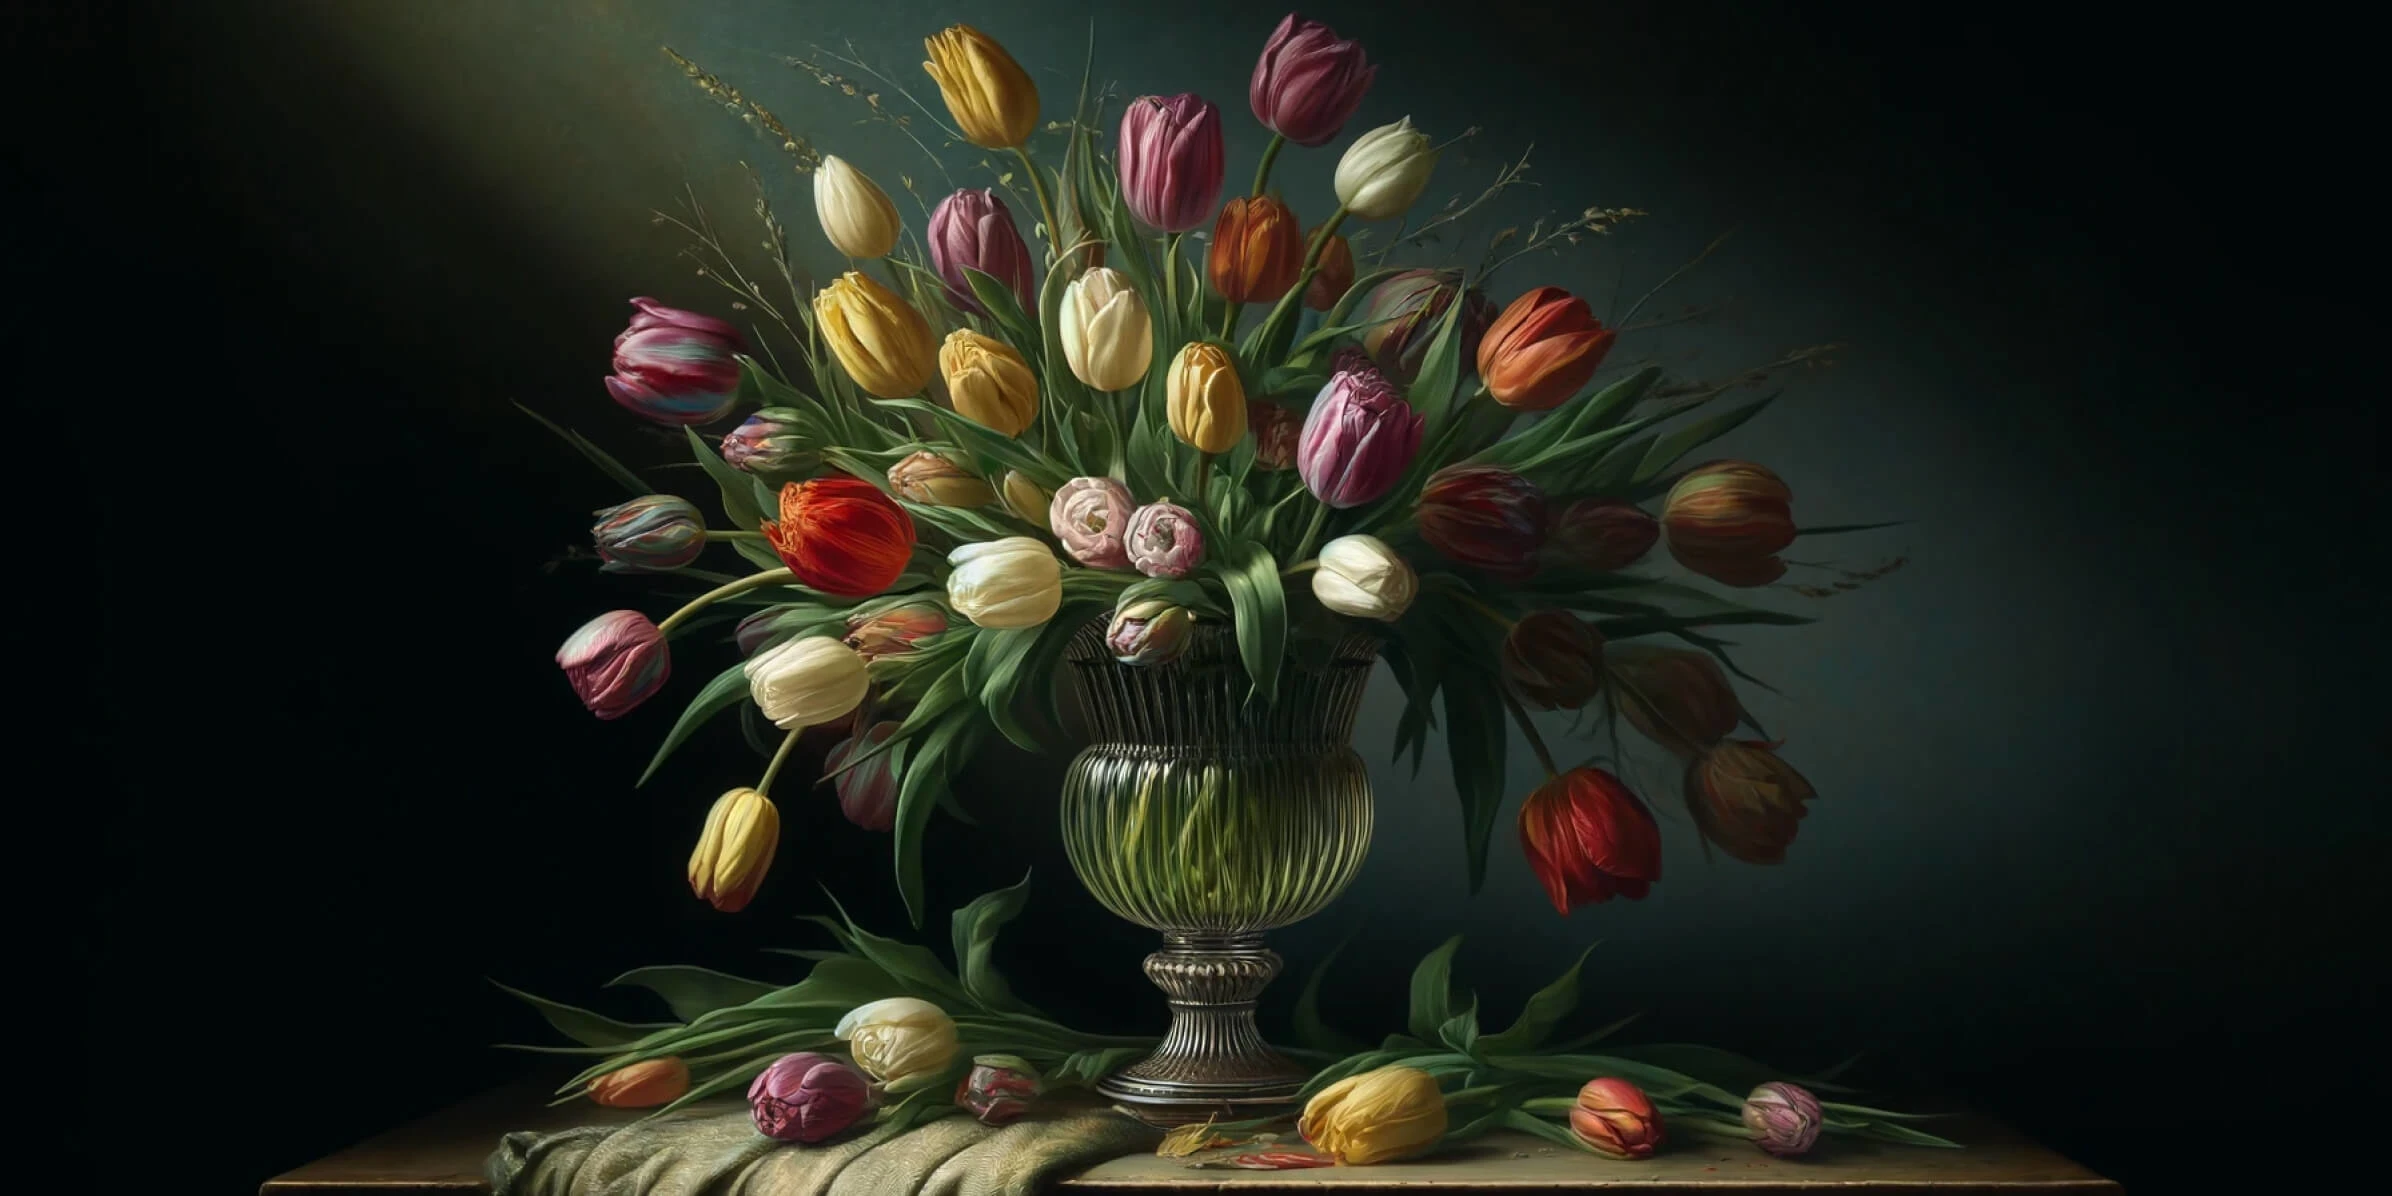 A Dutch still life featuring an arrangement of tulips in a fluted vase. The lighting in the scene is subtle, casting gentle highlights on the flowers and emphasizing their delicate textures and natural beauty.